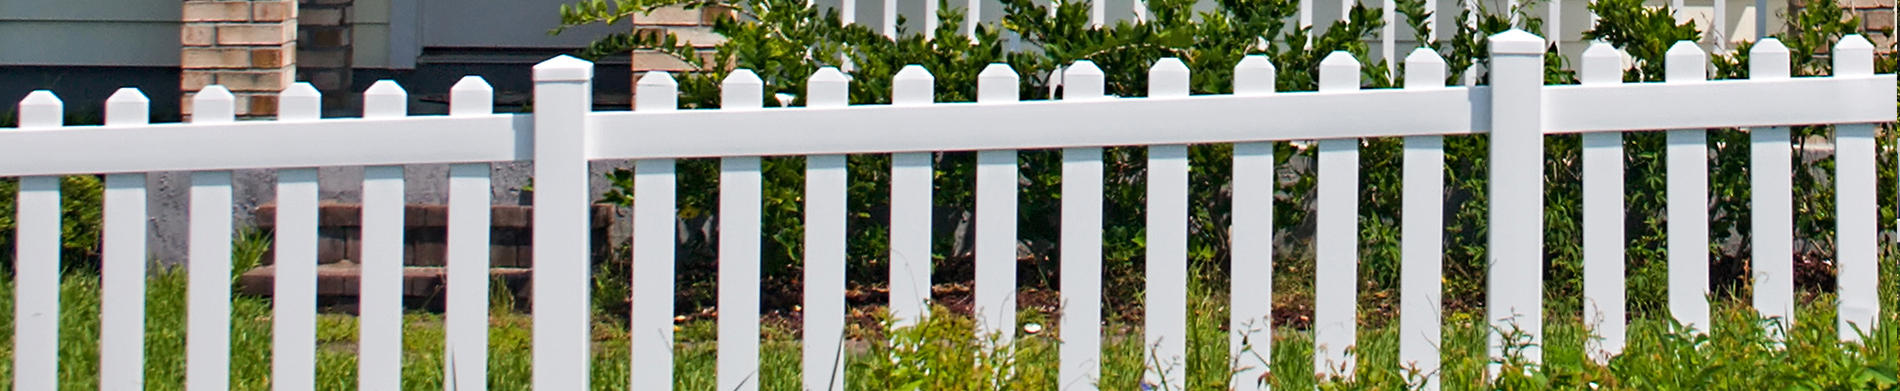 Install a Vinyl Fence and Reduce Noise Pollution